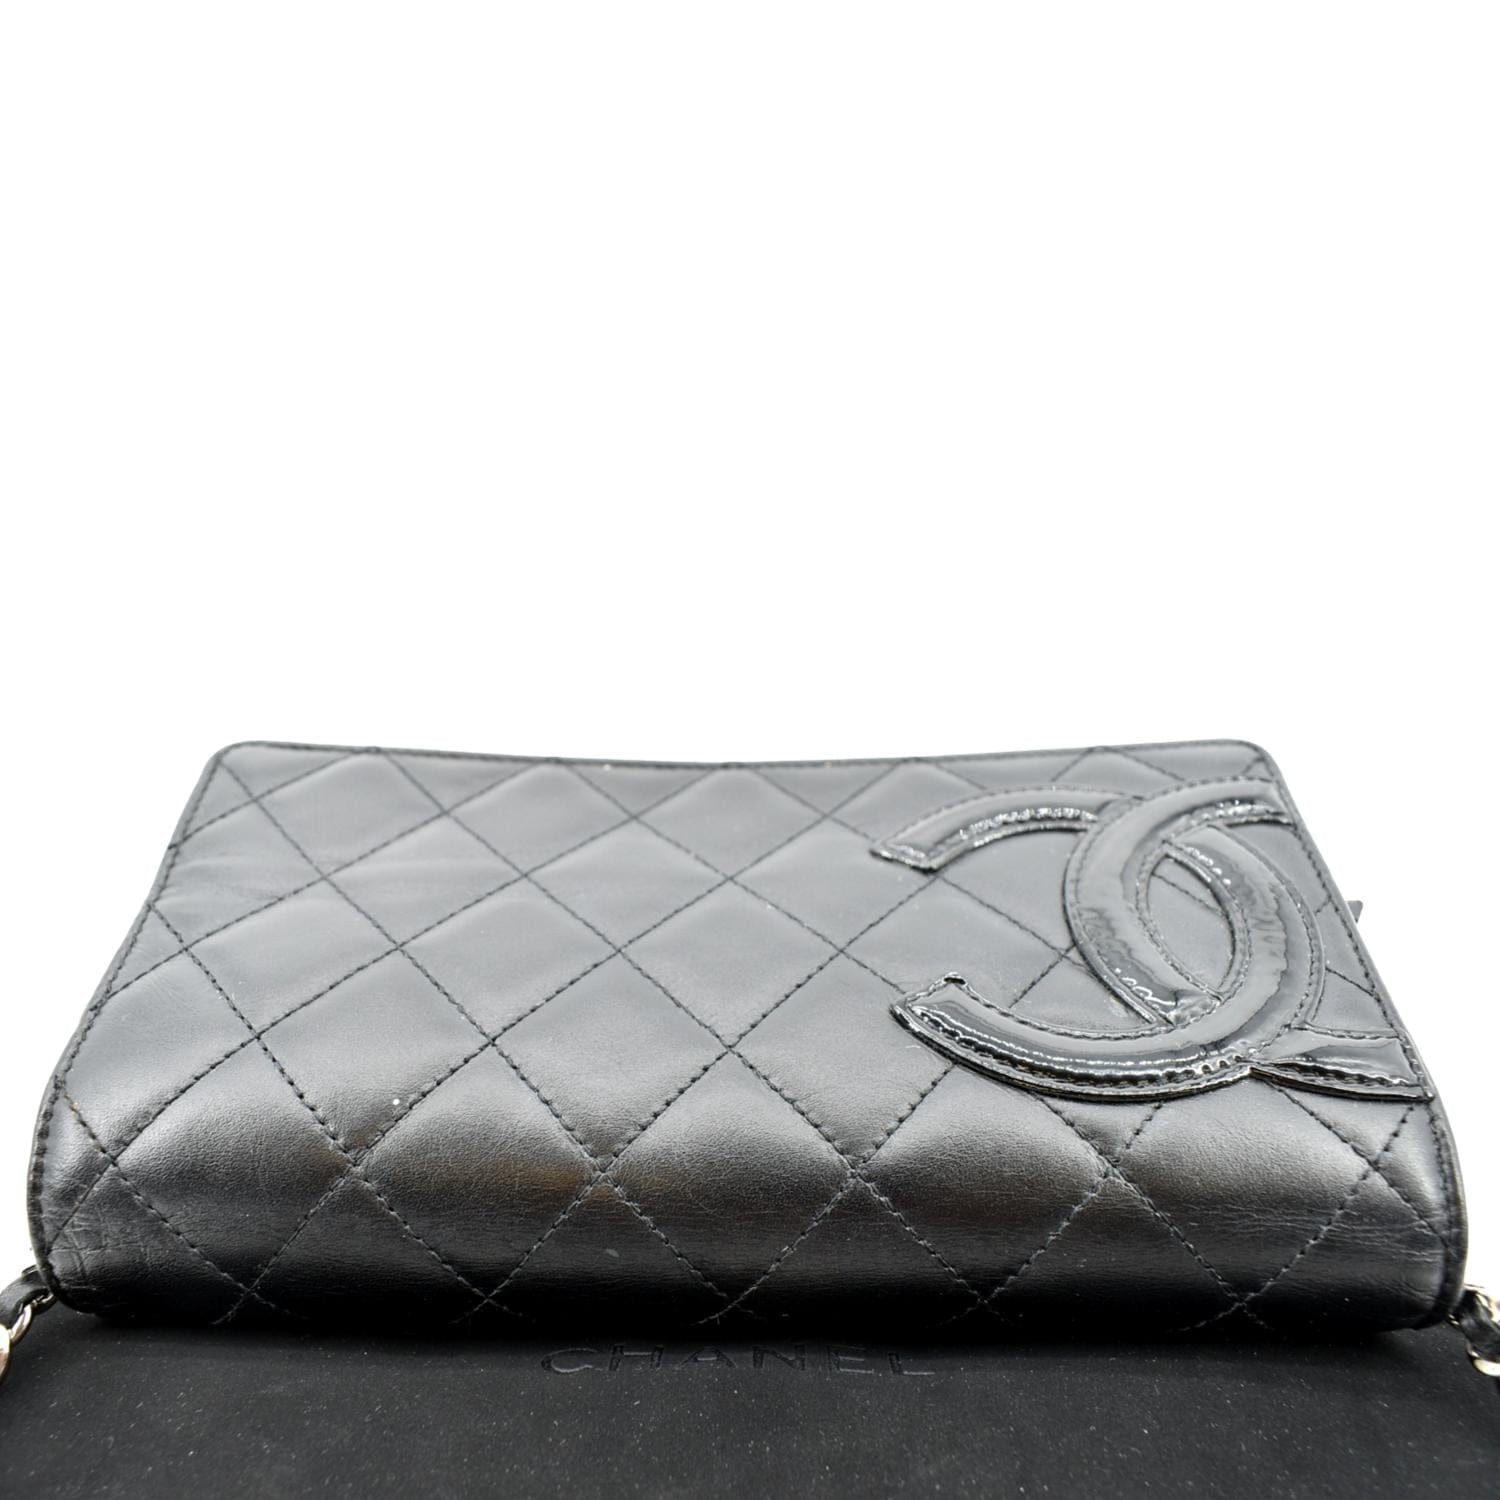 Authentic CHANEL Cambon Line Bifold Wallet Leather Black